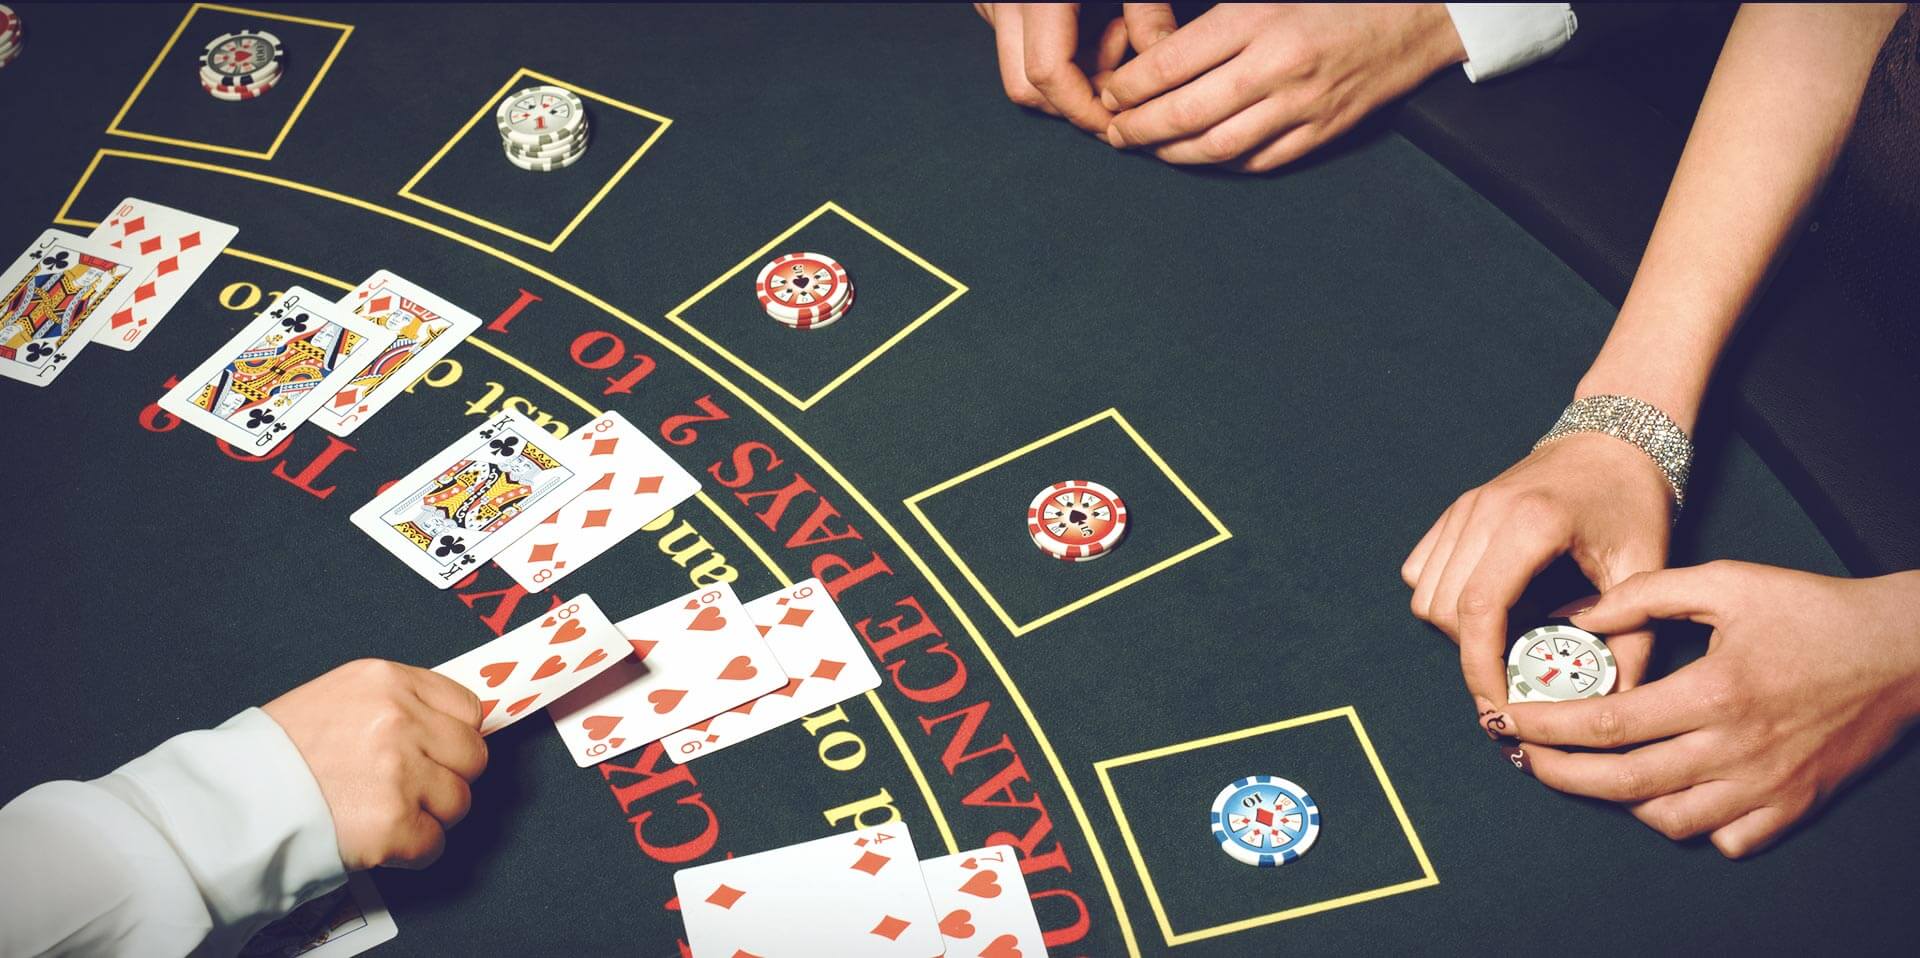 Blackjack and different variations that people can play in casinos or online